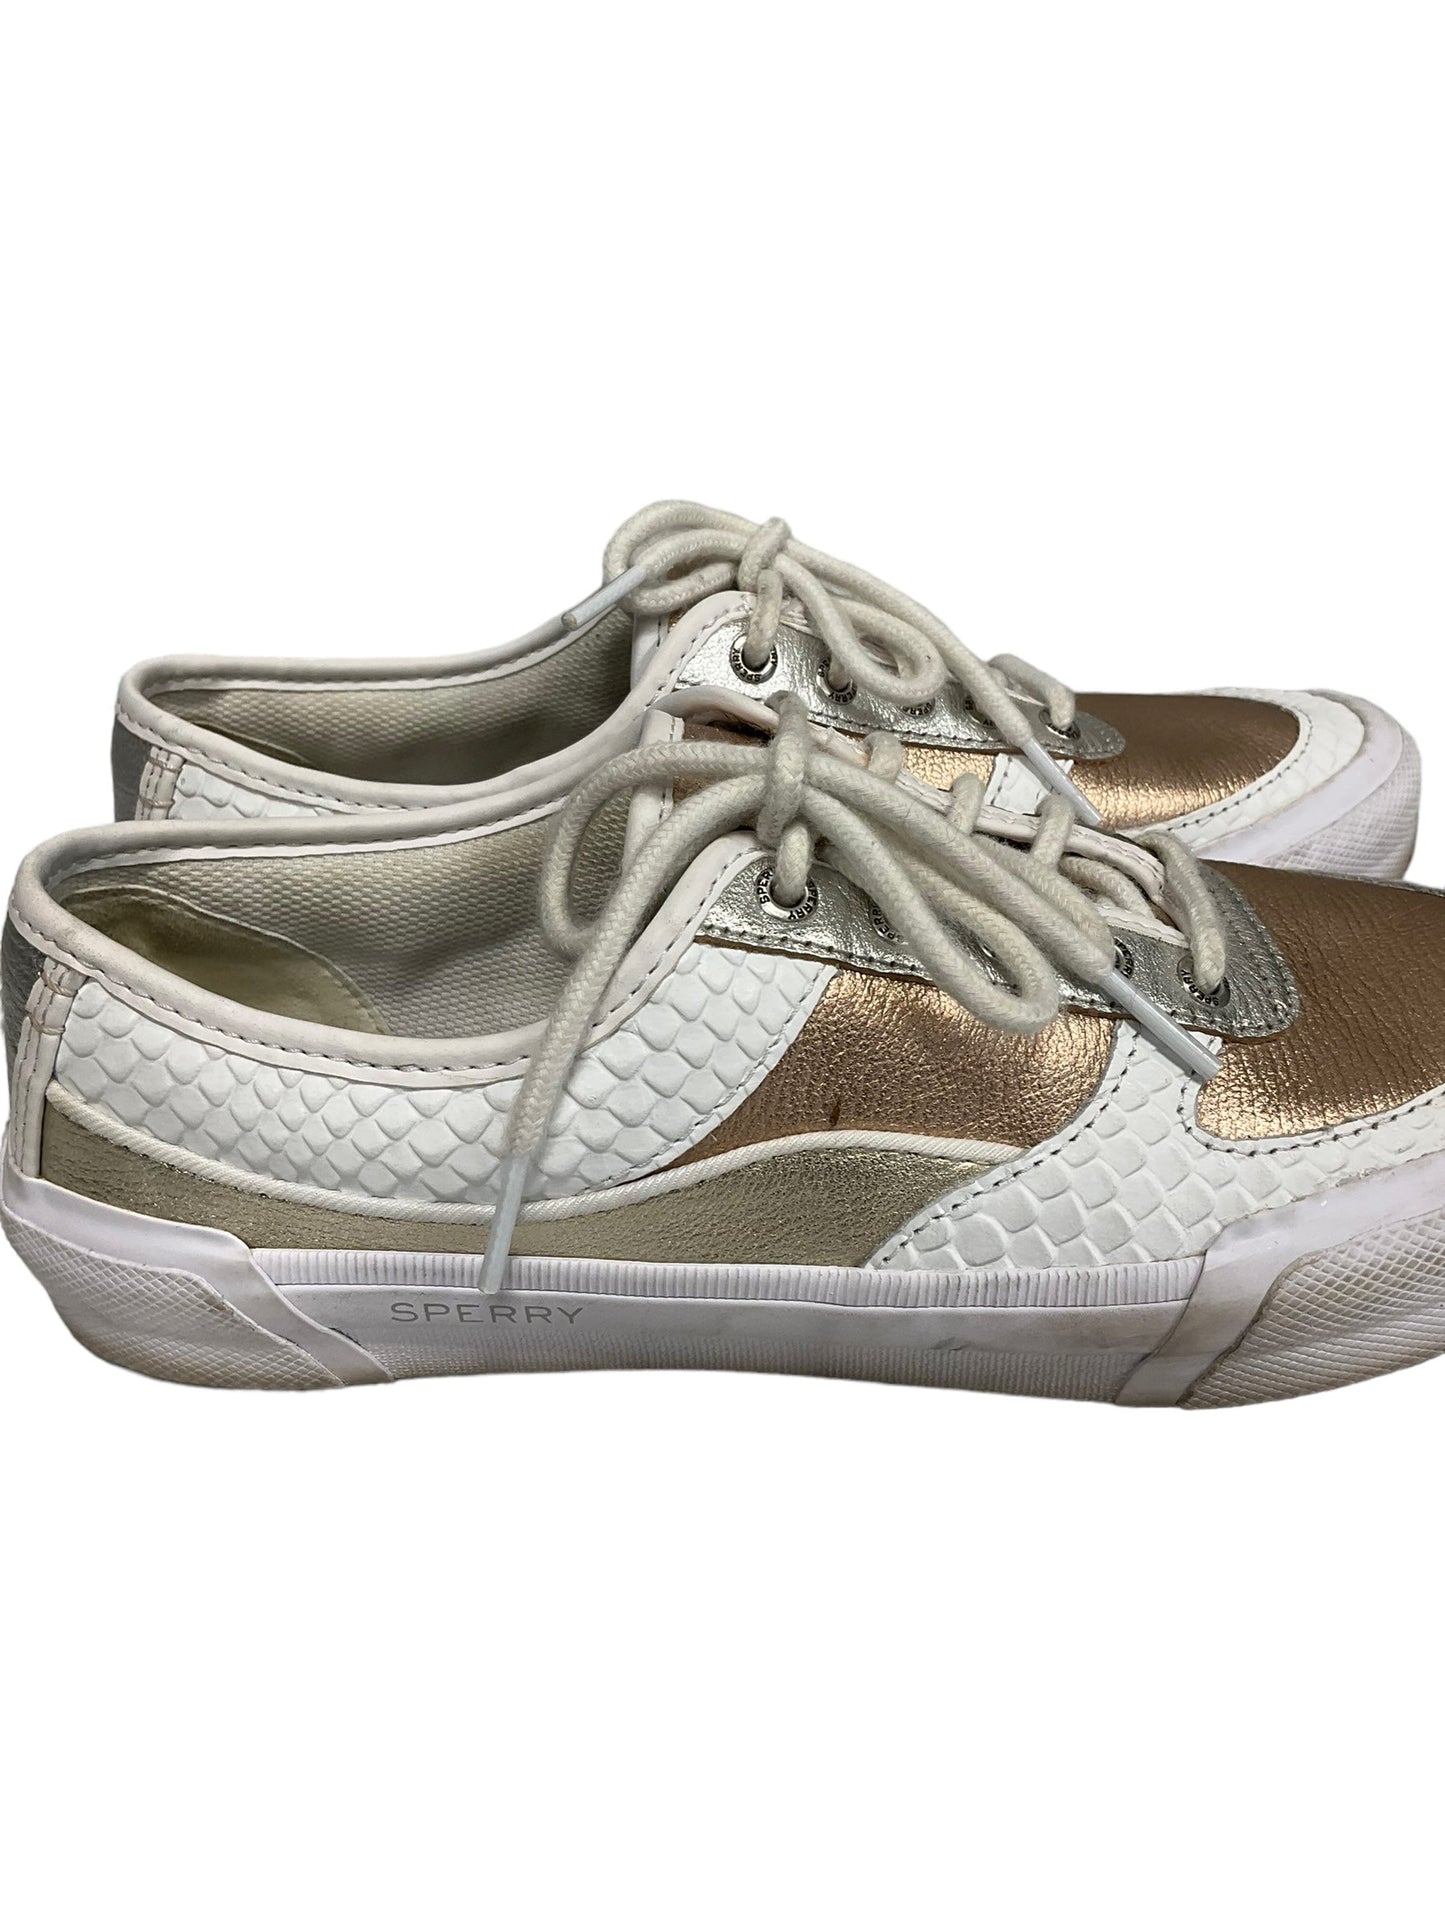 Shoes Athletic By Sperry  Size: 8.5